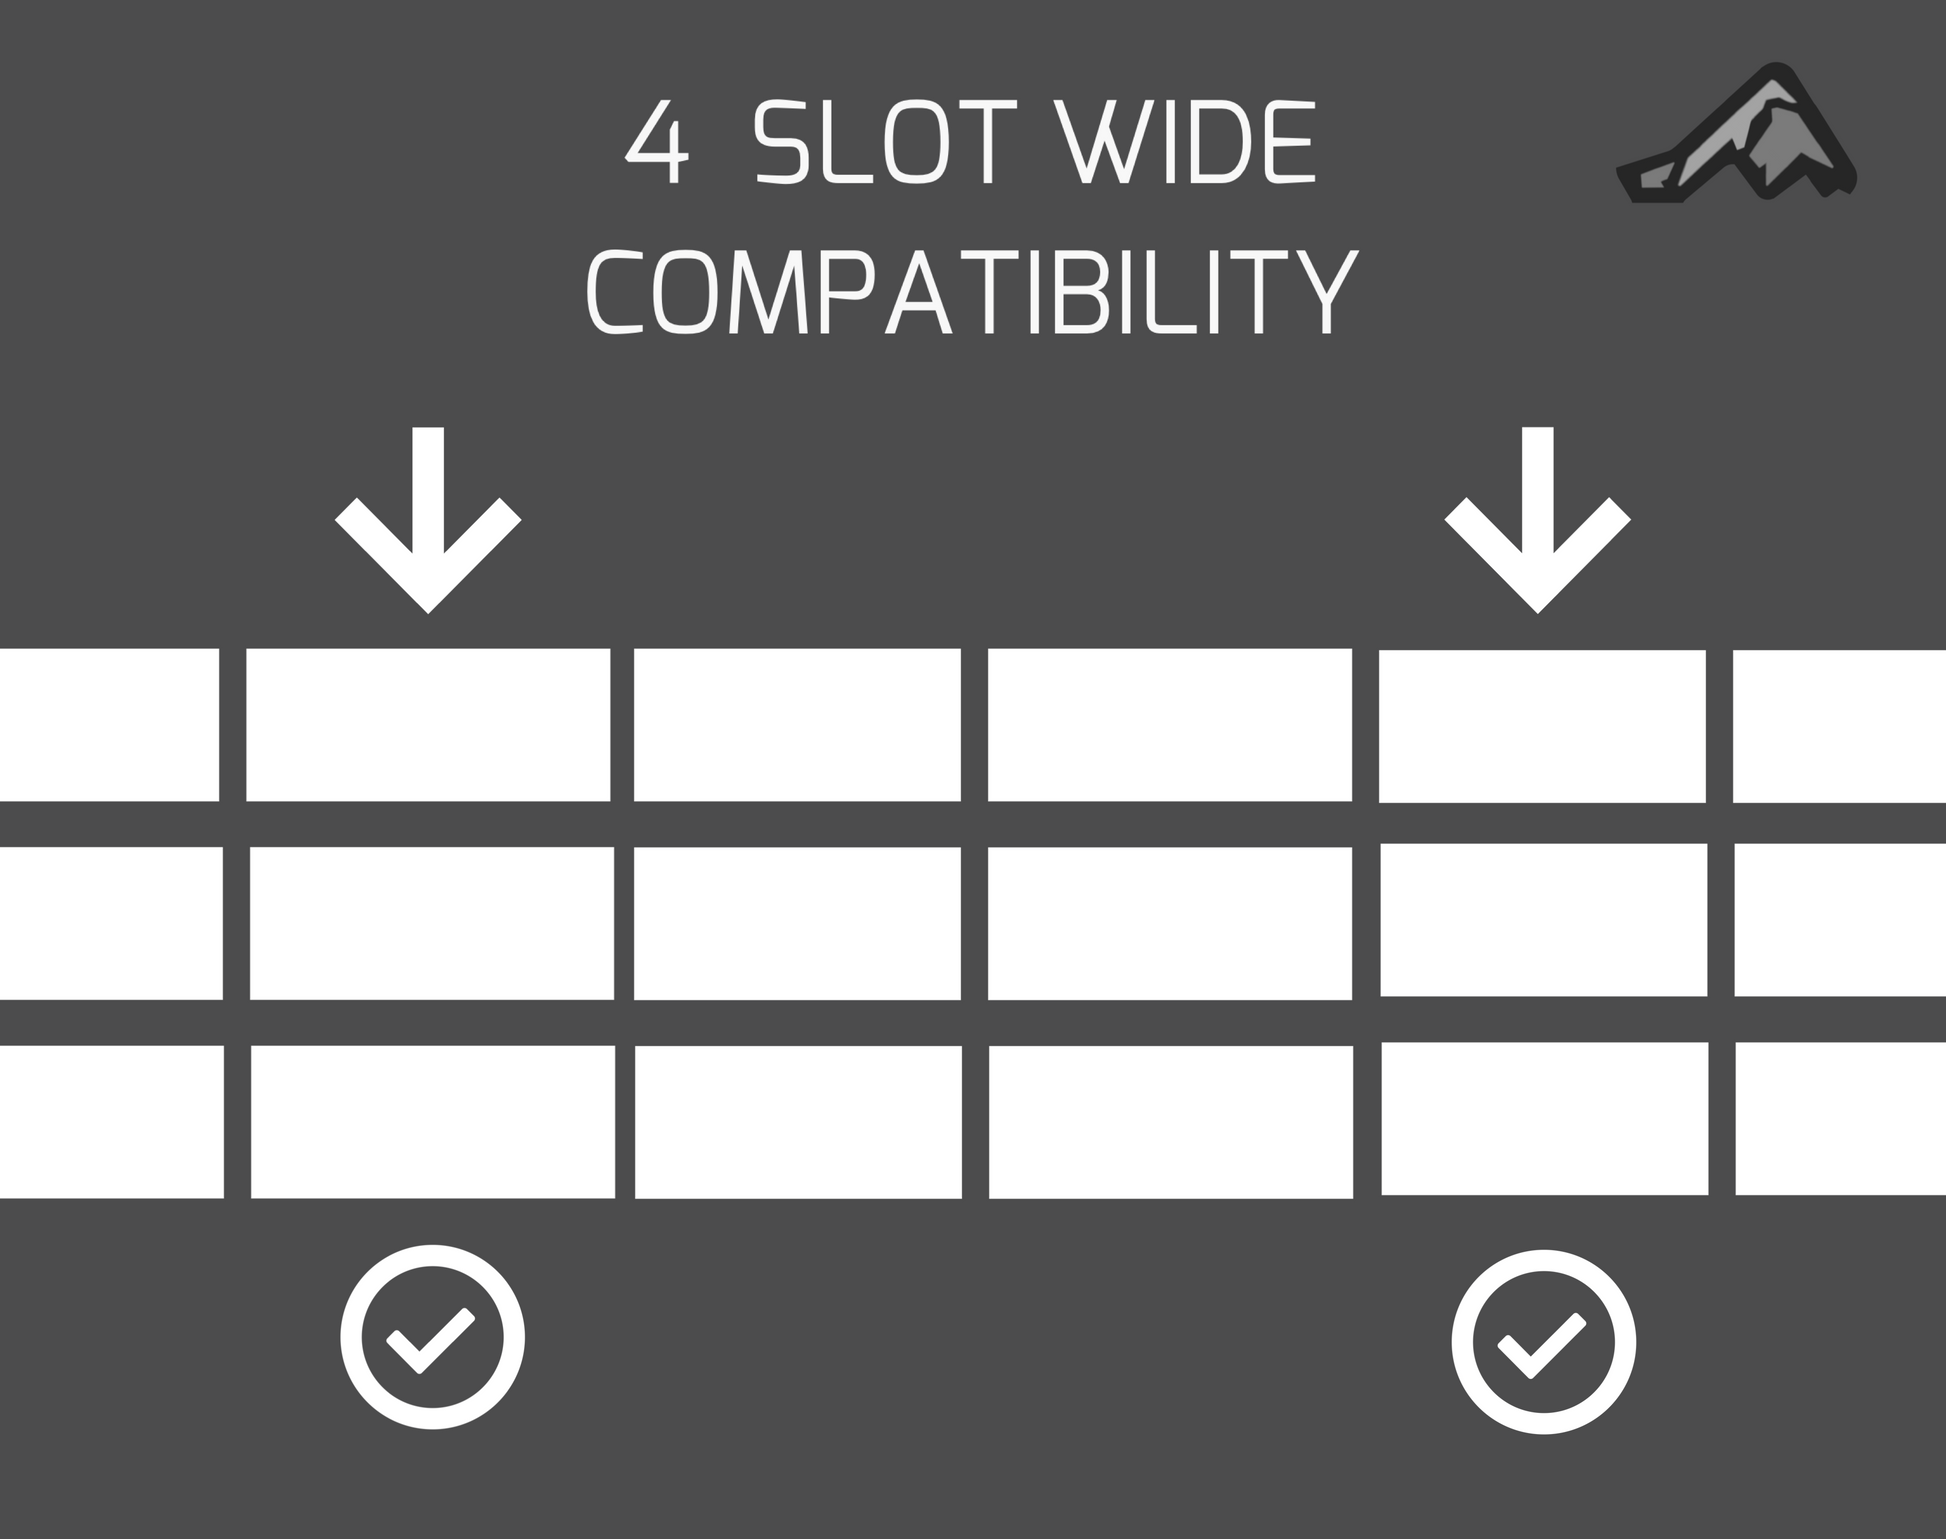 4 slot wide compatibility example for MOLLE and modular gear